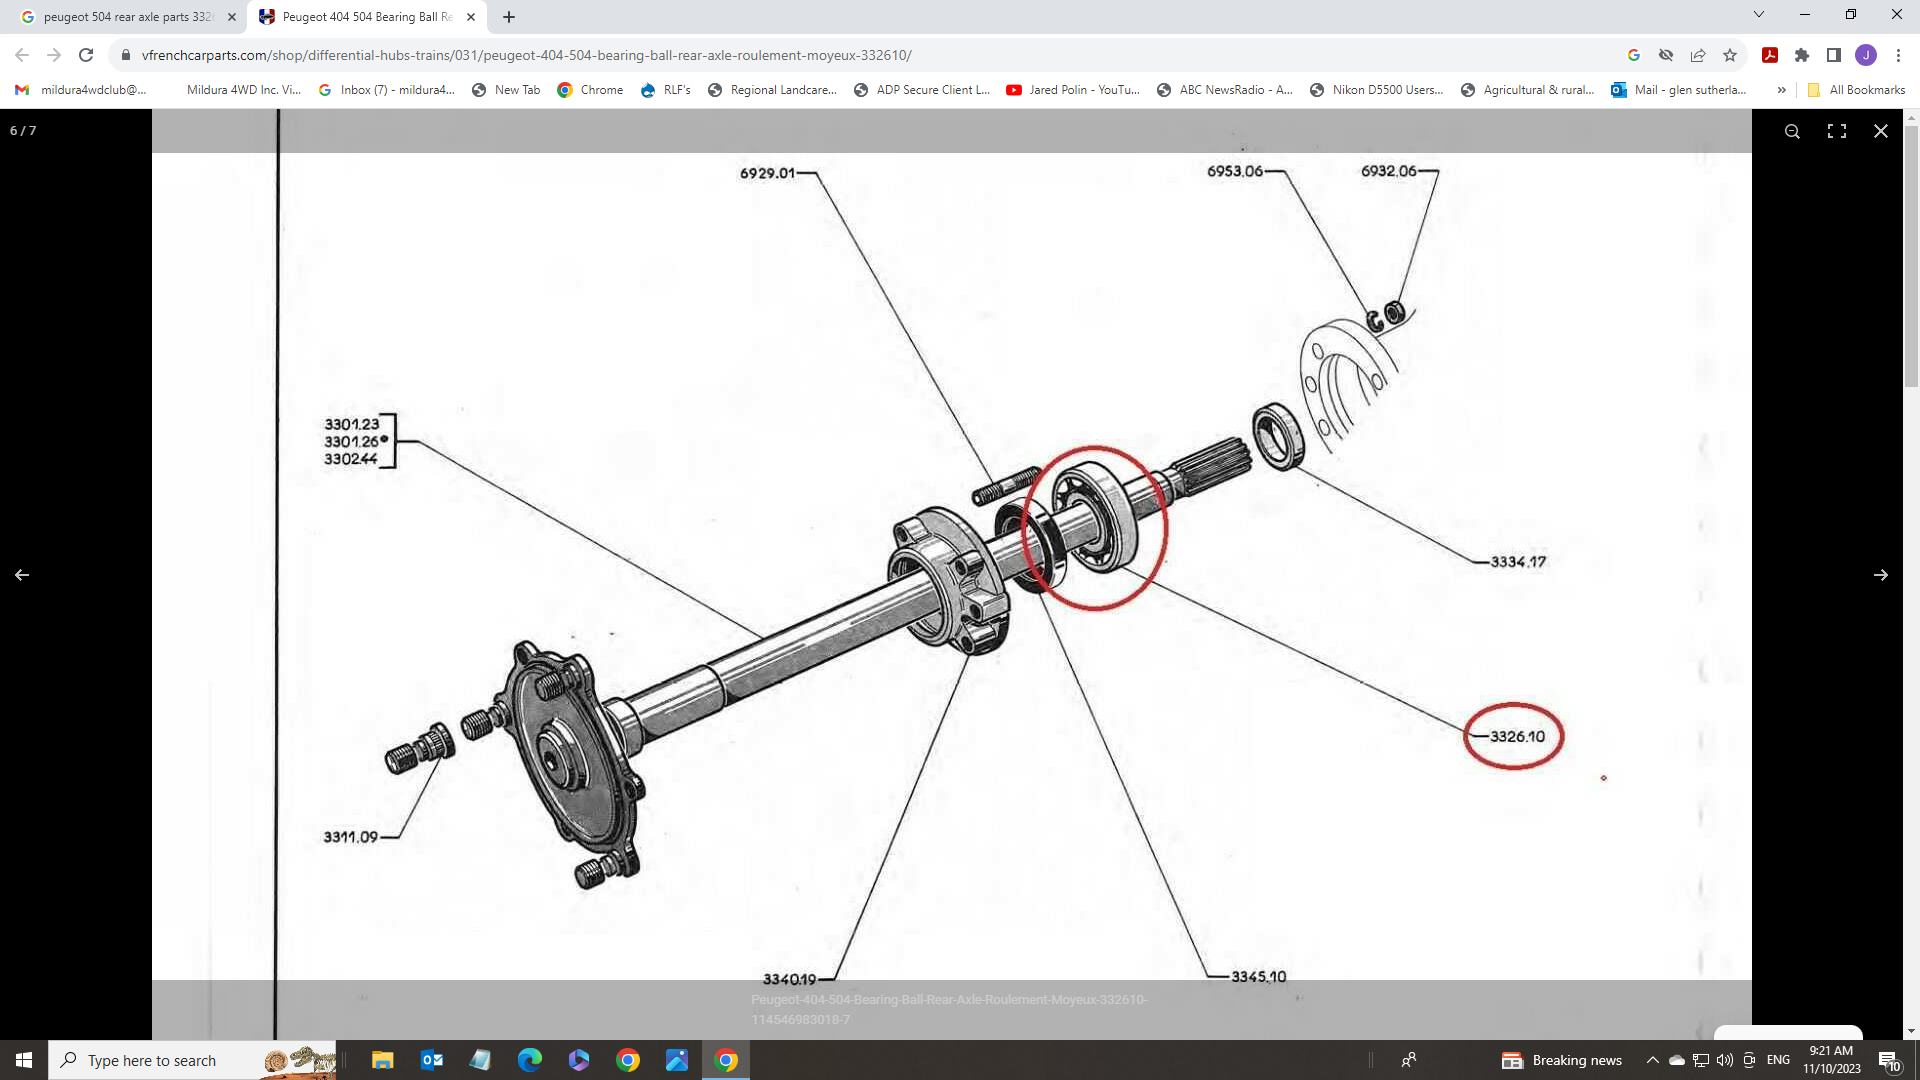 504 rear axle parts .png